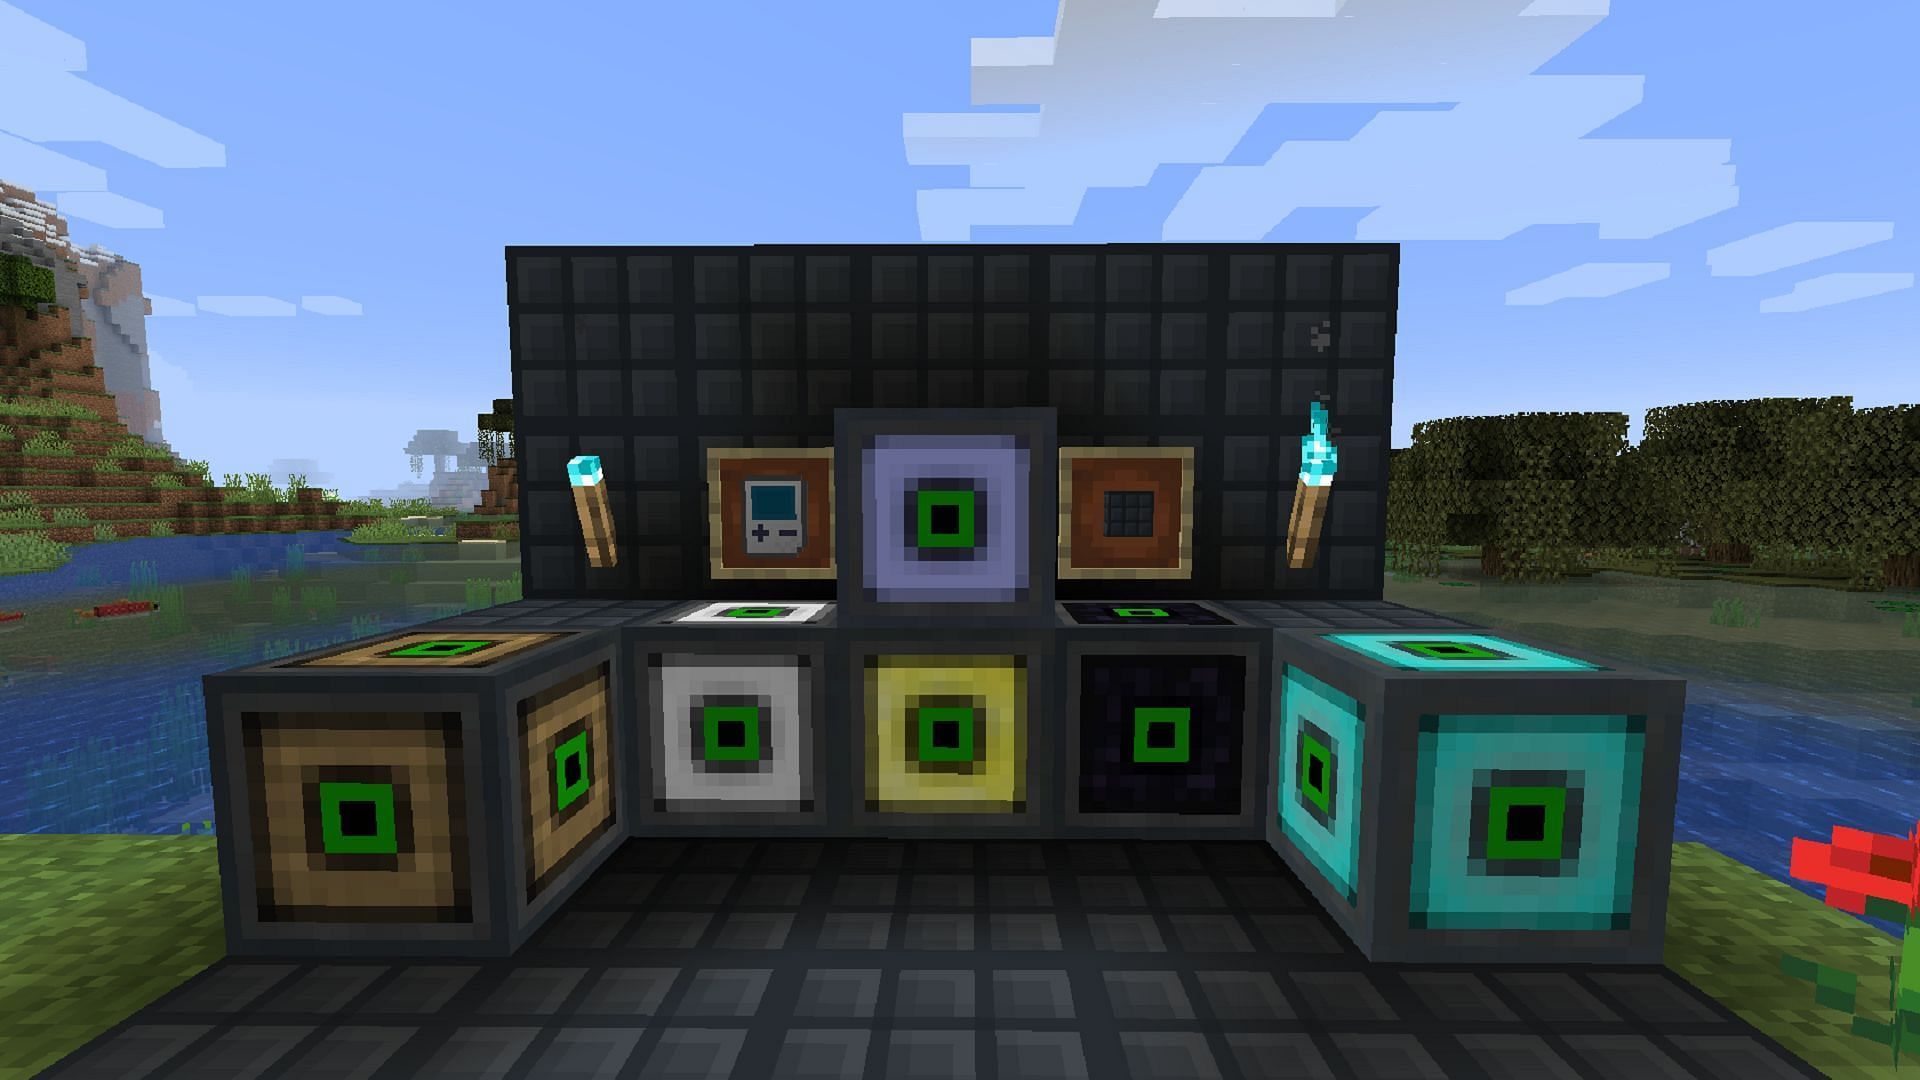 Automation can be compressed into a single block with Compact Machines (Image via davenonymous/CurseForge)